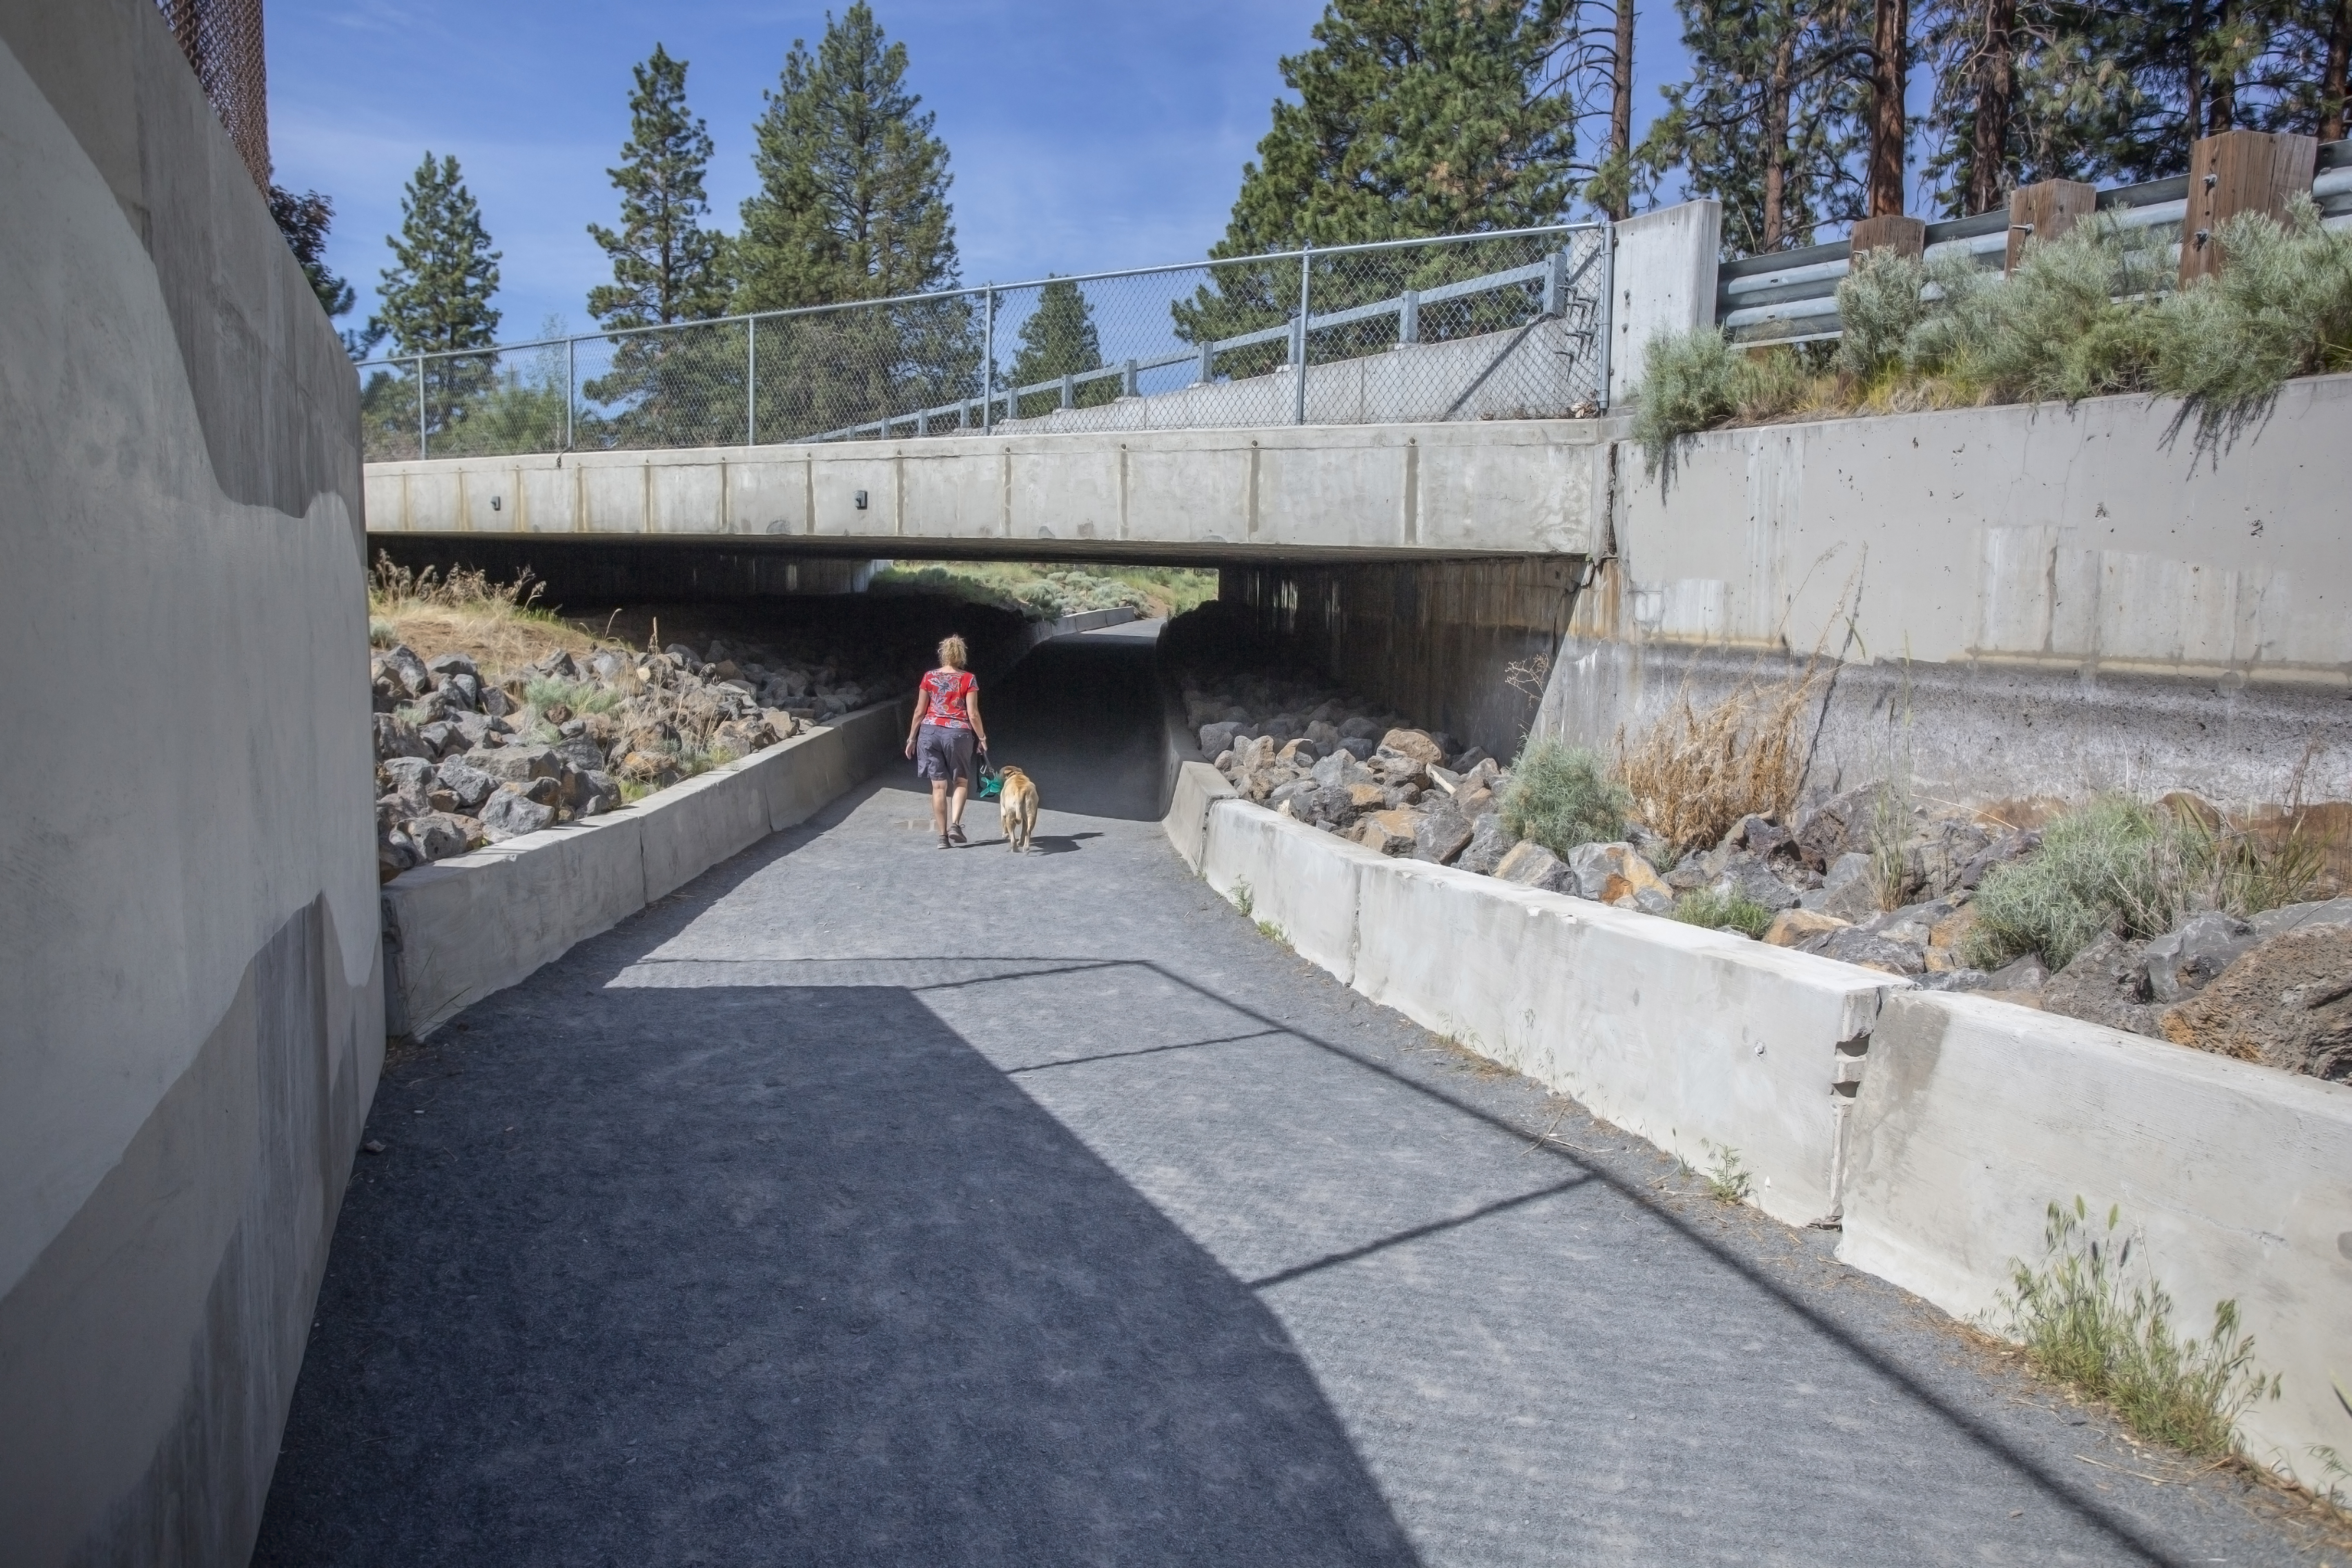 The COHCT undercrossing at Brookswood Boulevard